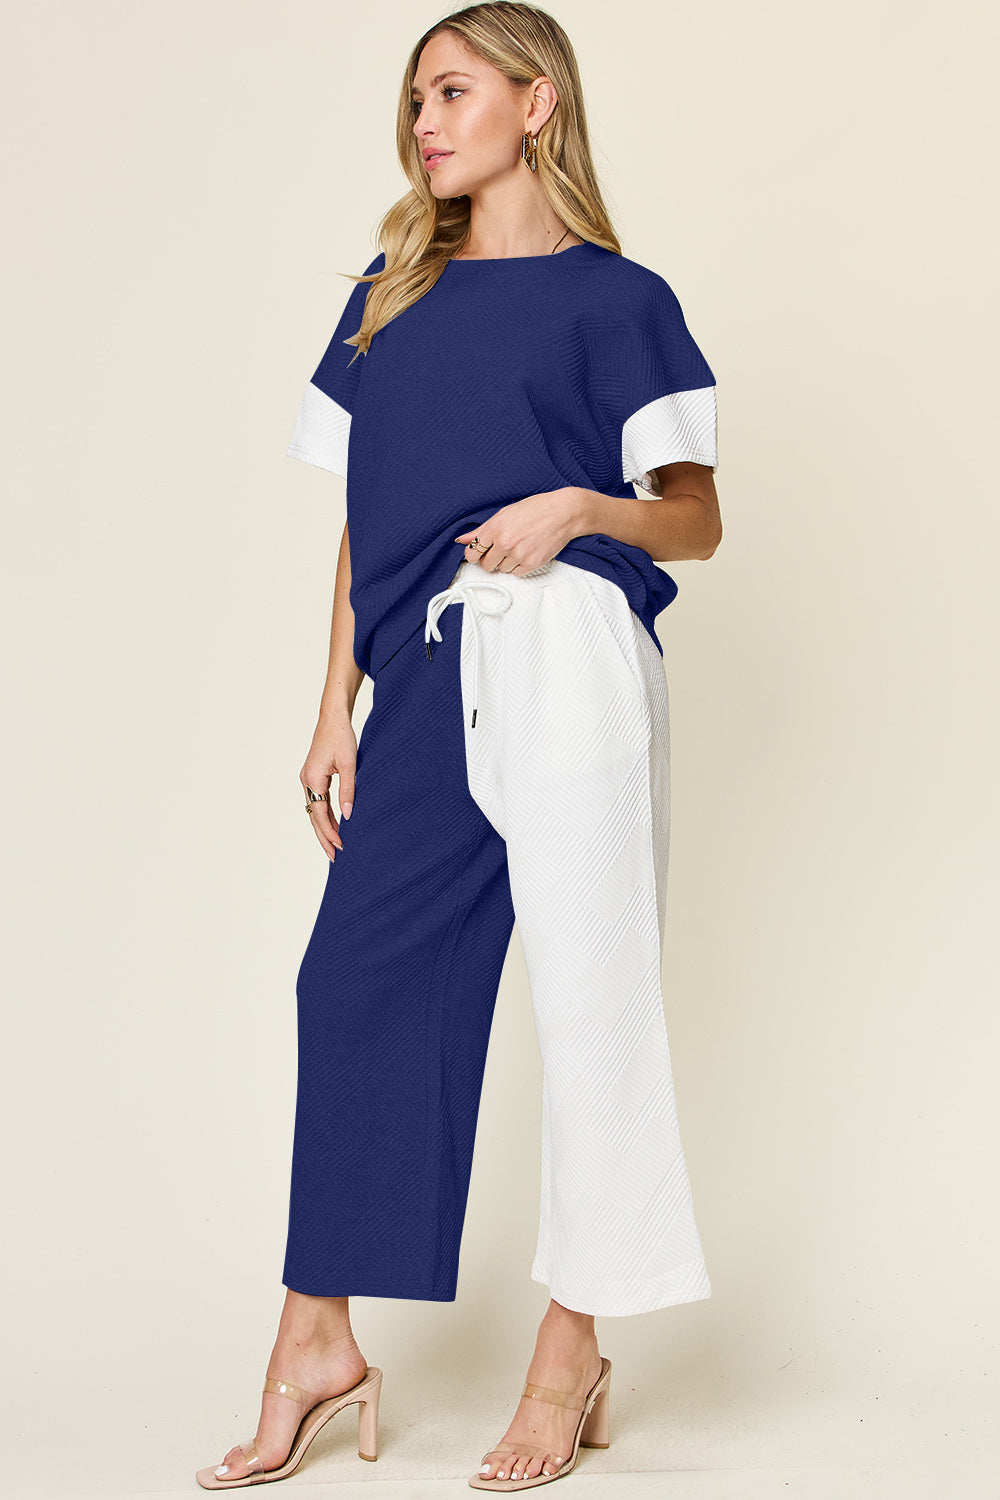 4 Colors* Boujie Babe Textured Contrast T-Shirt and Wide Leg Pants Set